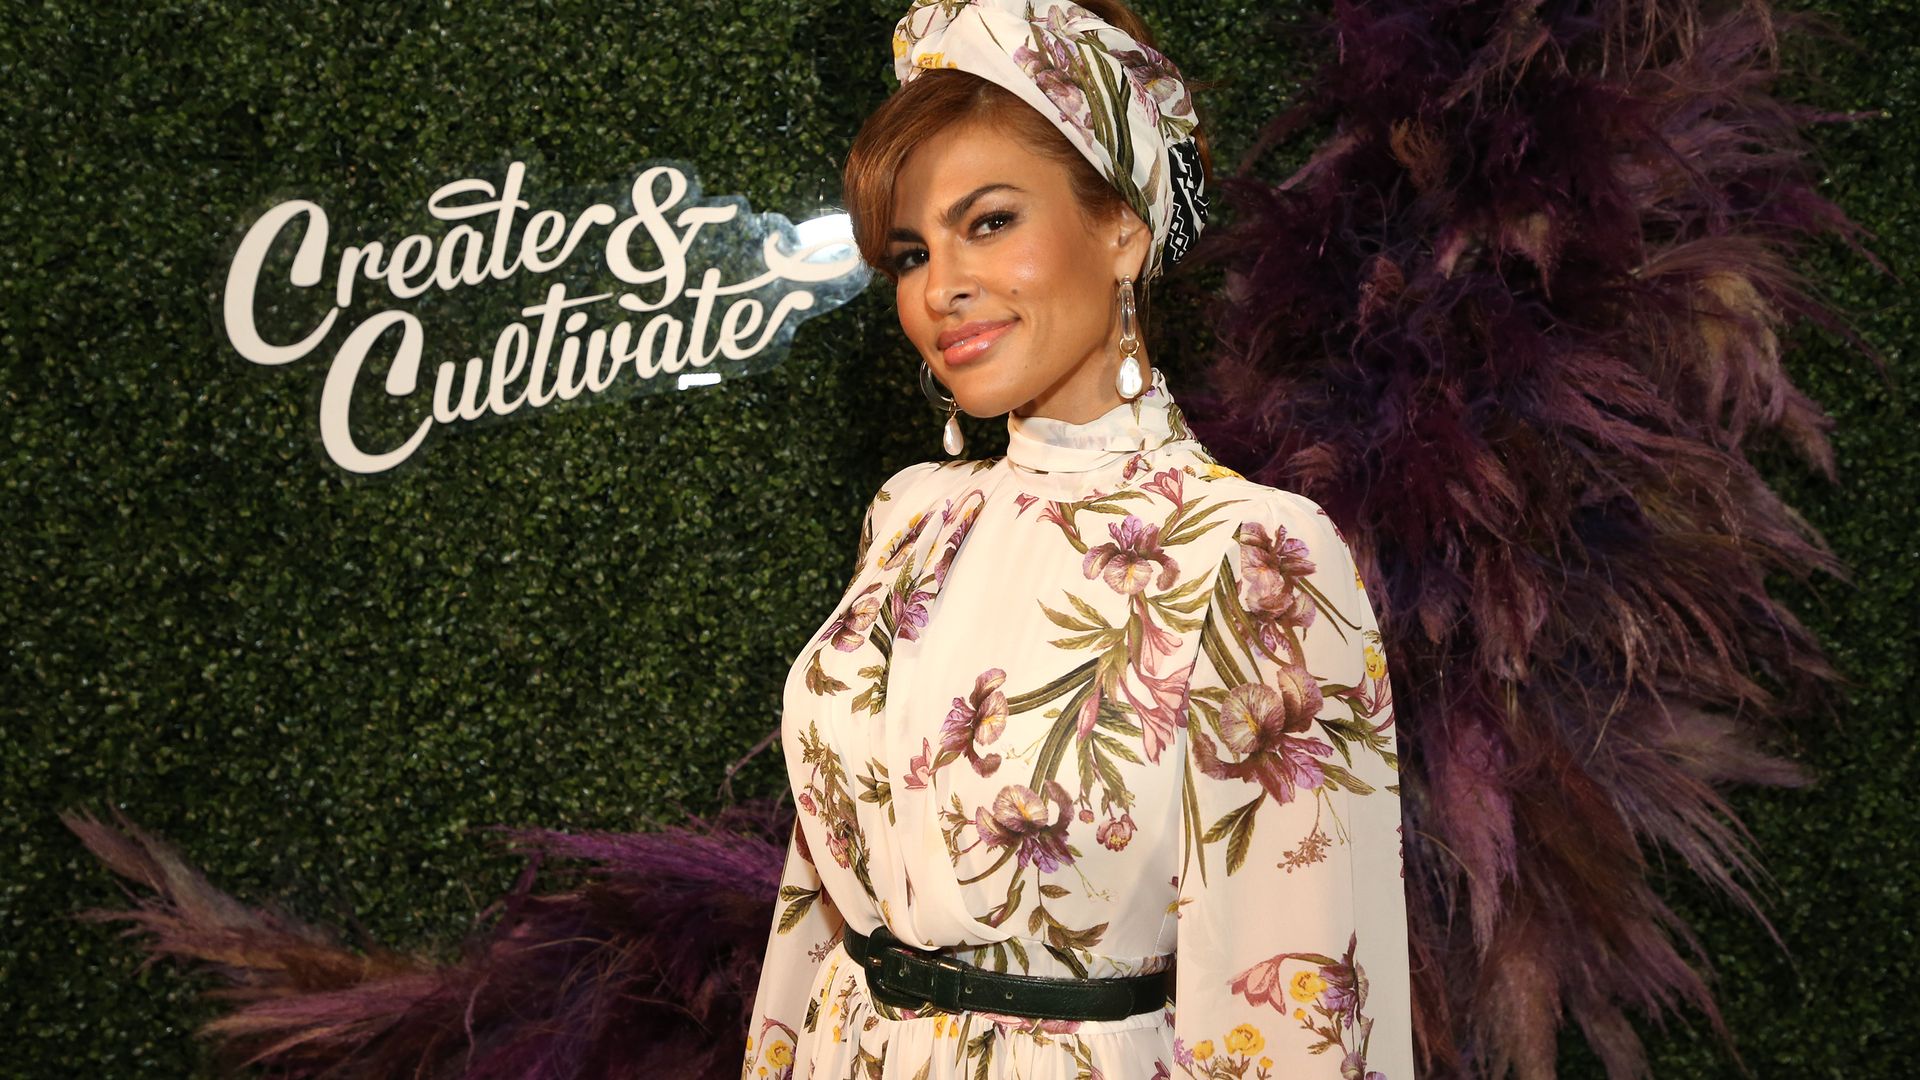 LOS ANGELES, CALIFORNIA - FEBRUARY 22:  Eva Mendes attends Create & Cultivate Los Angeles at Rolling Greens Los Angeles on February 22, 2020 in Los Angeles, California. (Photo by Phillip Faraone/Getty Images)